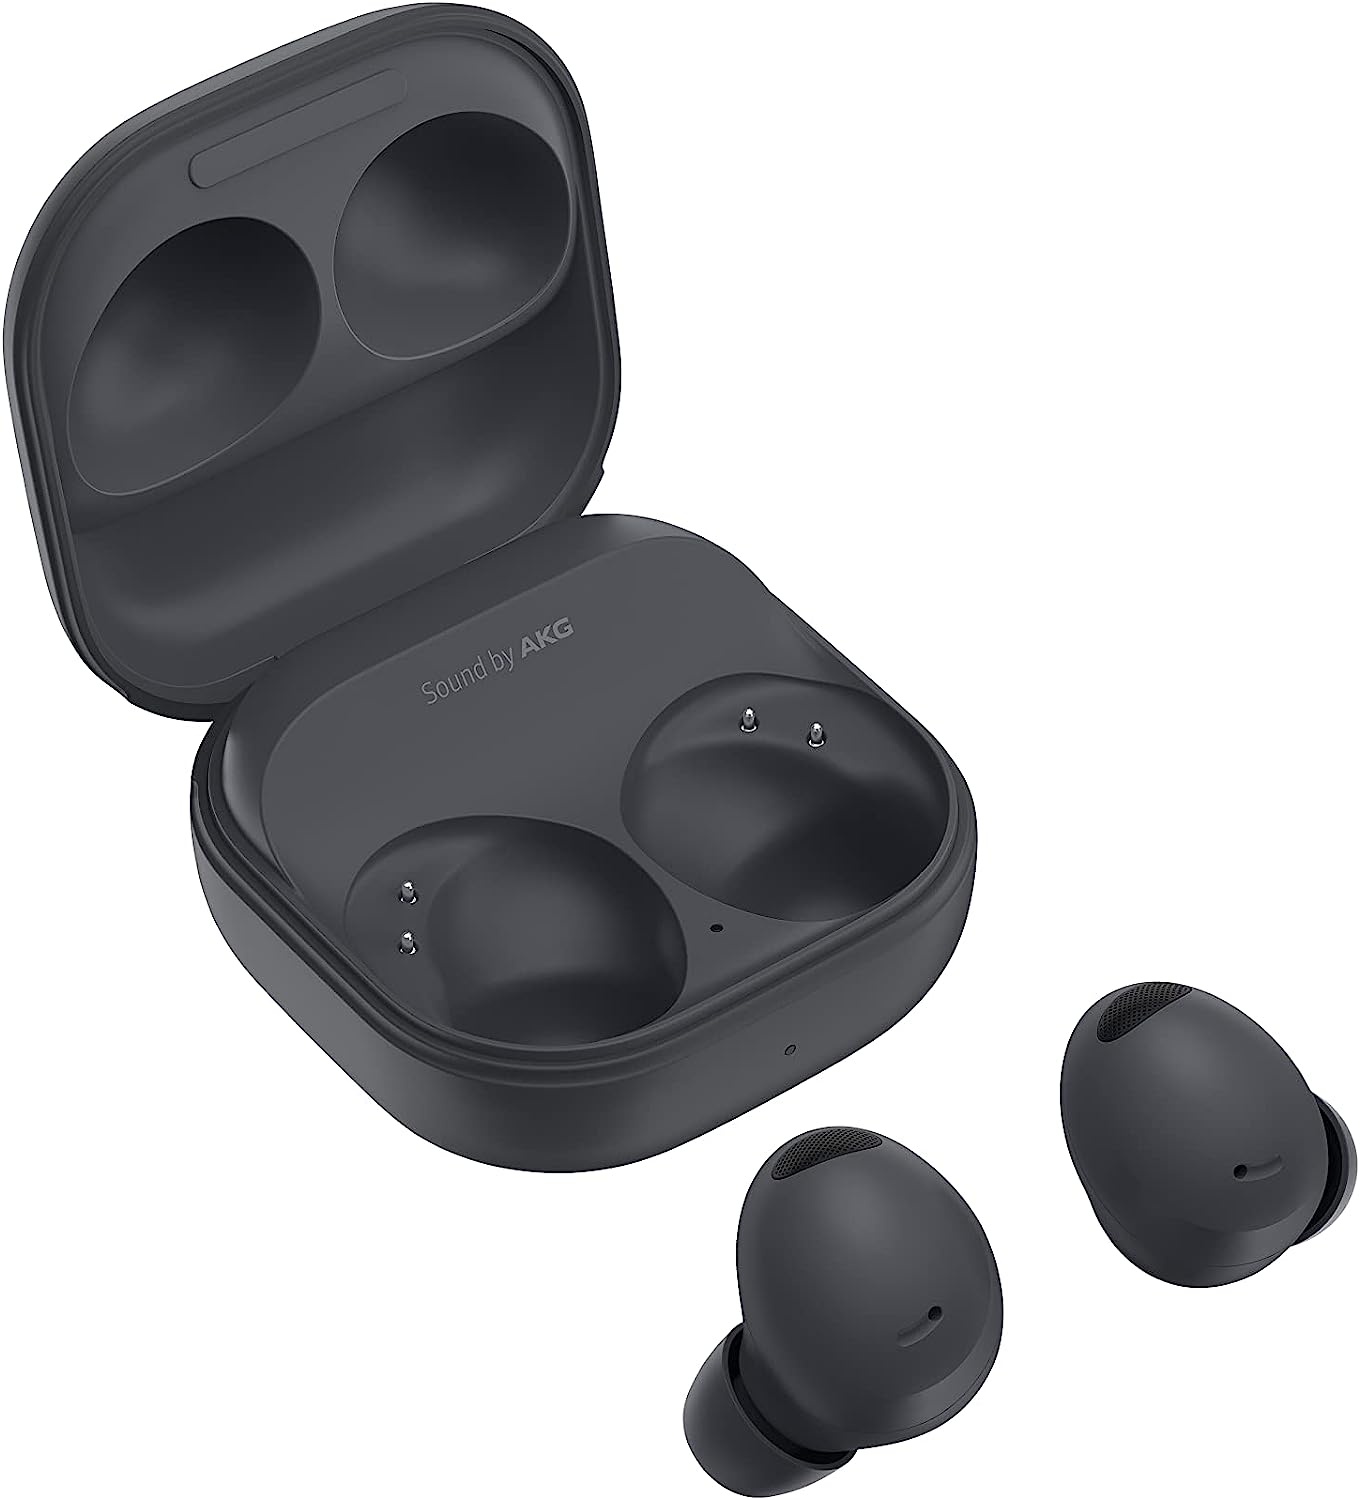 Samsung’s Galaxy Buds 2 Pro are at an All Time Low of $120